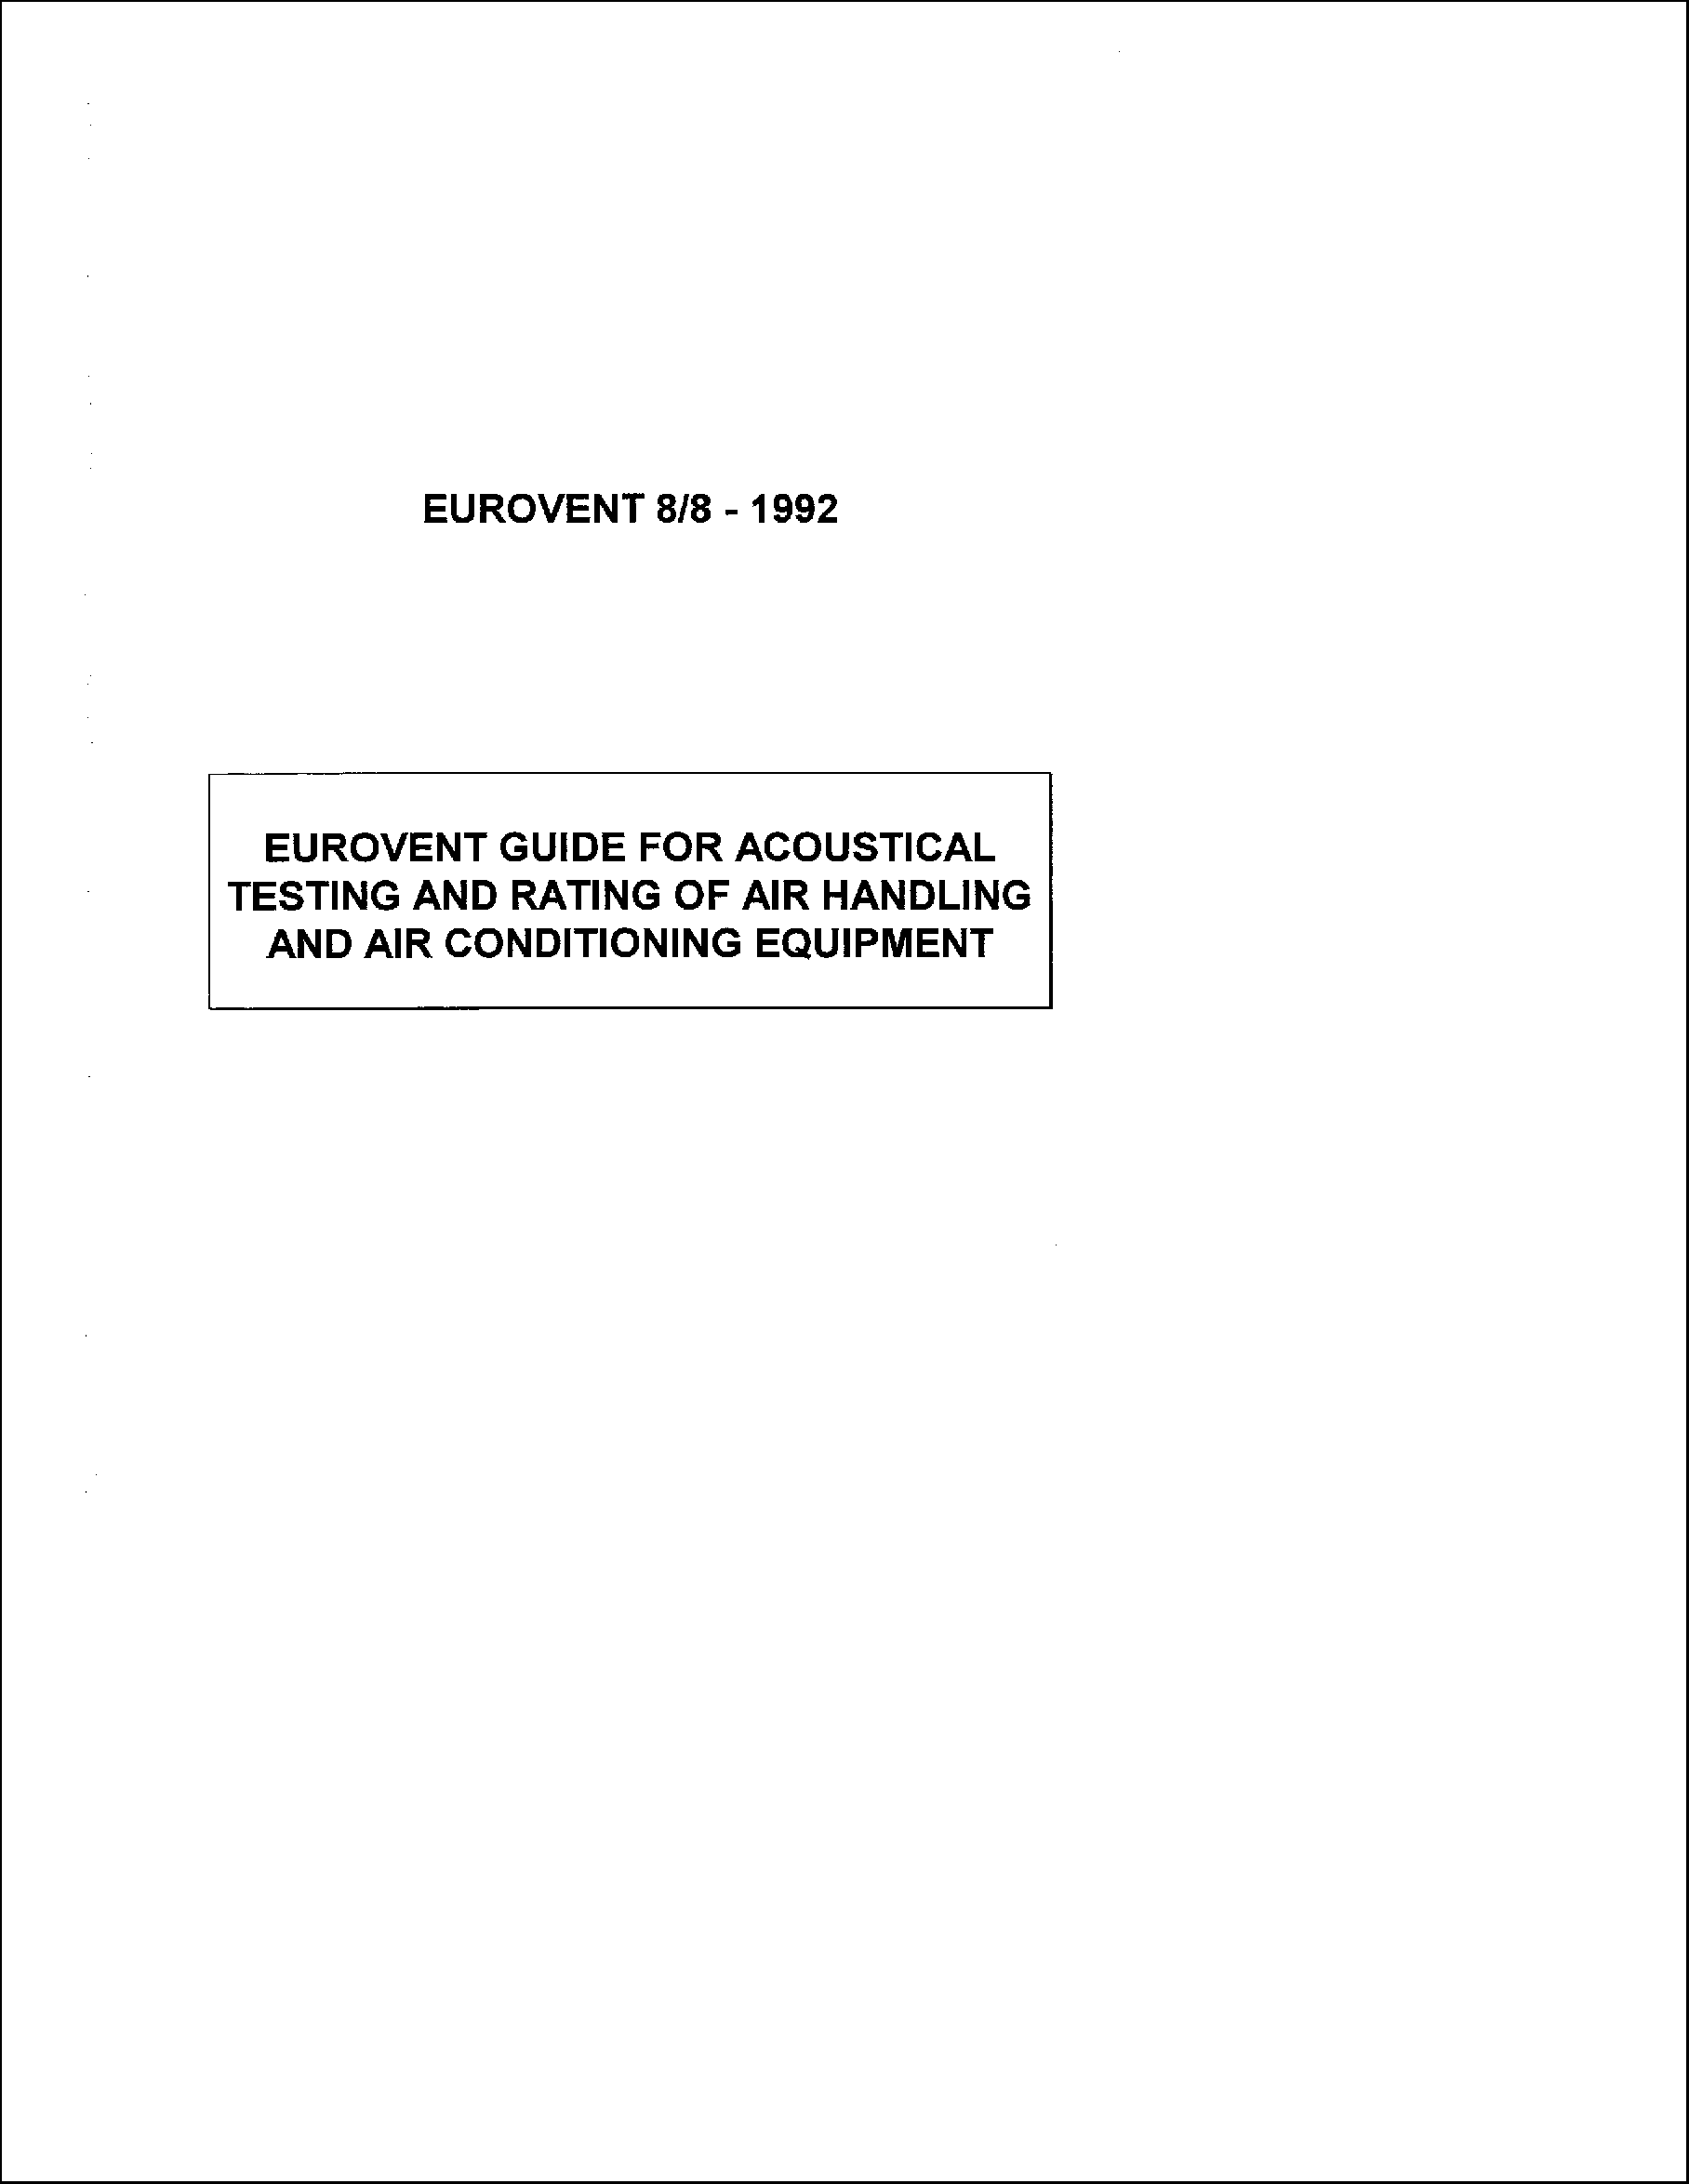 1992 - Guide for acoustical testing and rating of air handling and air conditioning equipment